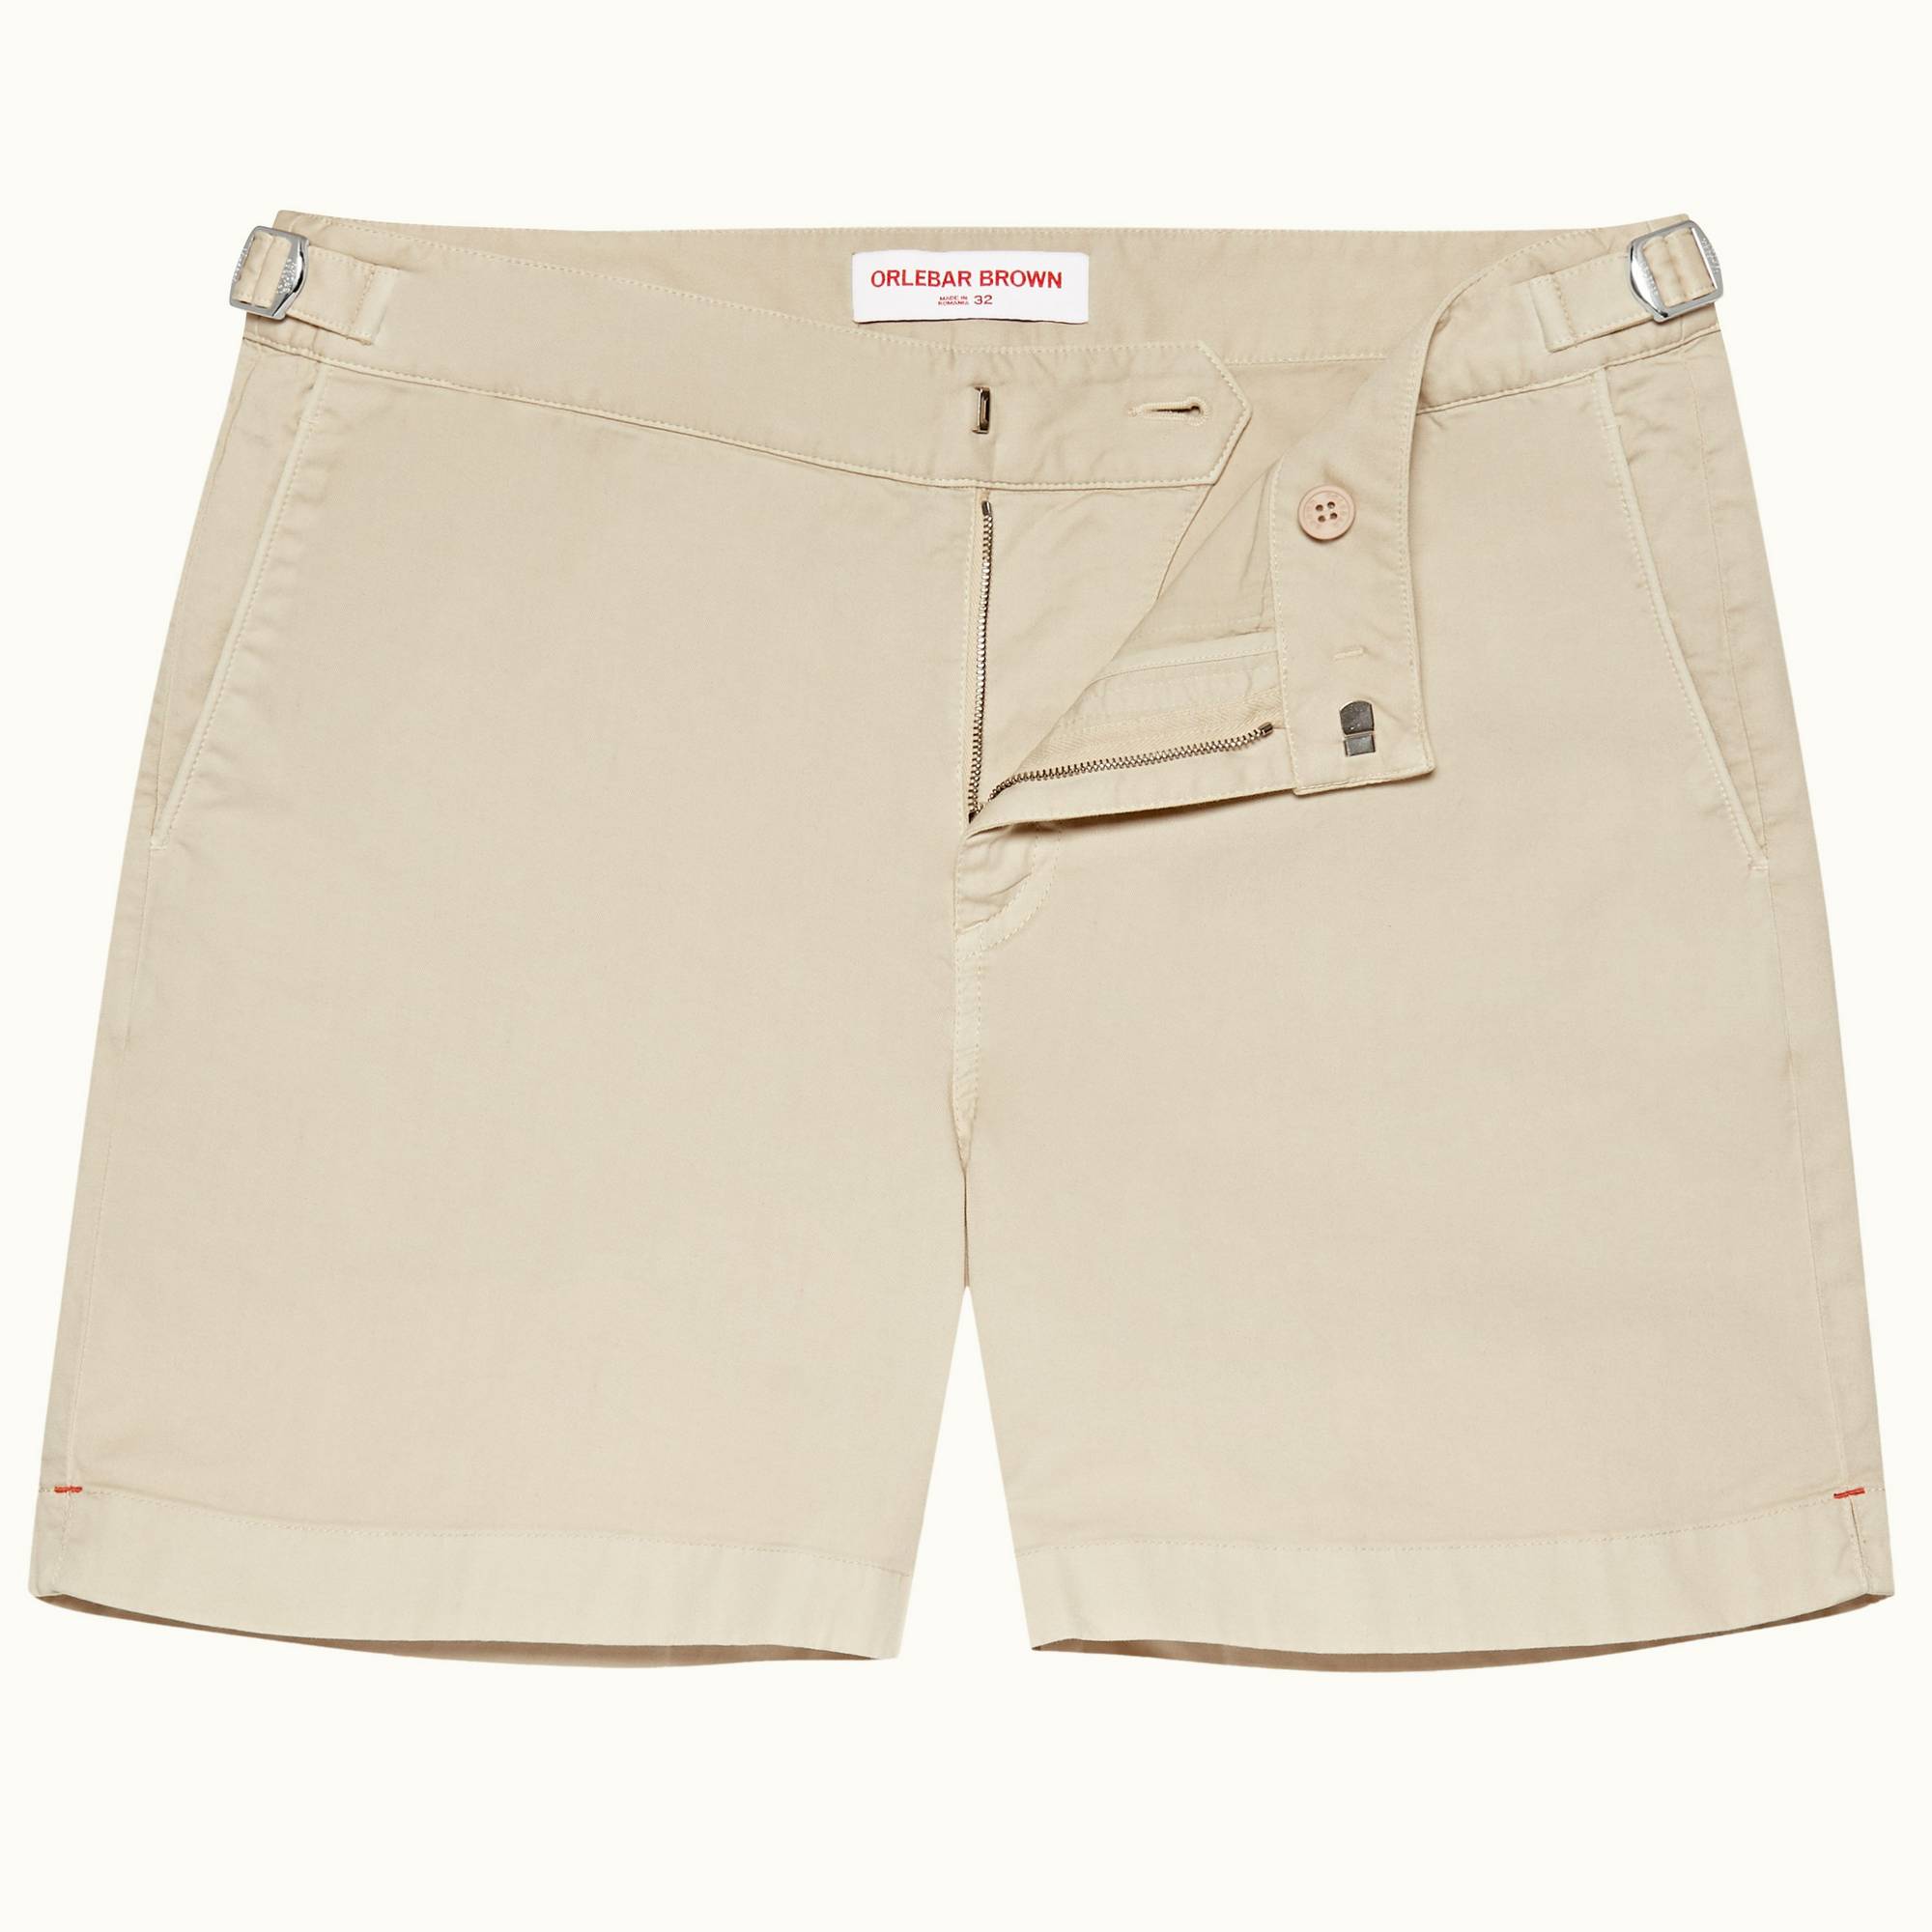 ORLEBAR BROWN  COTTON  SHORTS NEW AUTHENTIC 